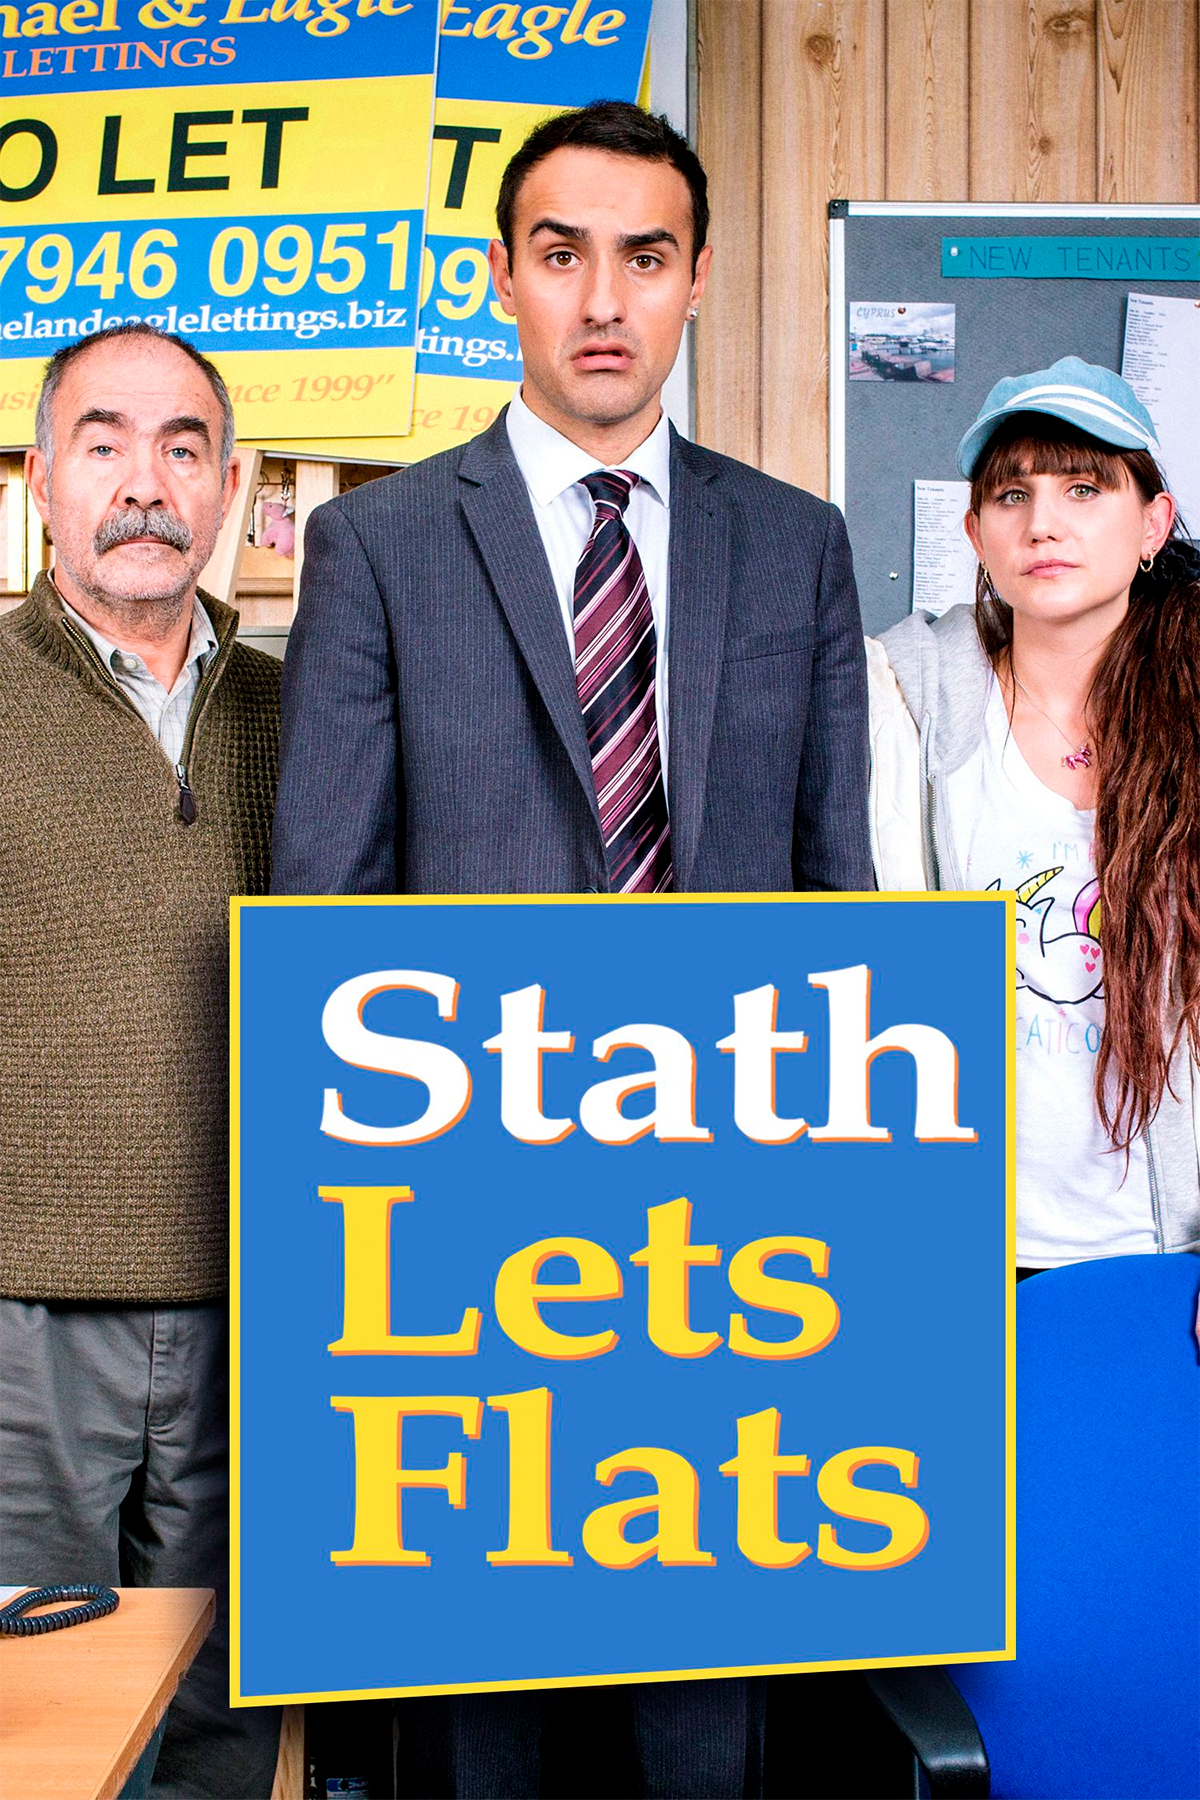 stath lets flats dailymotion